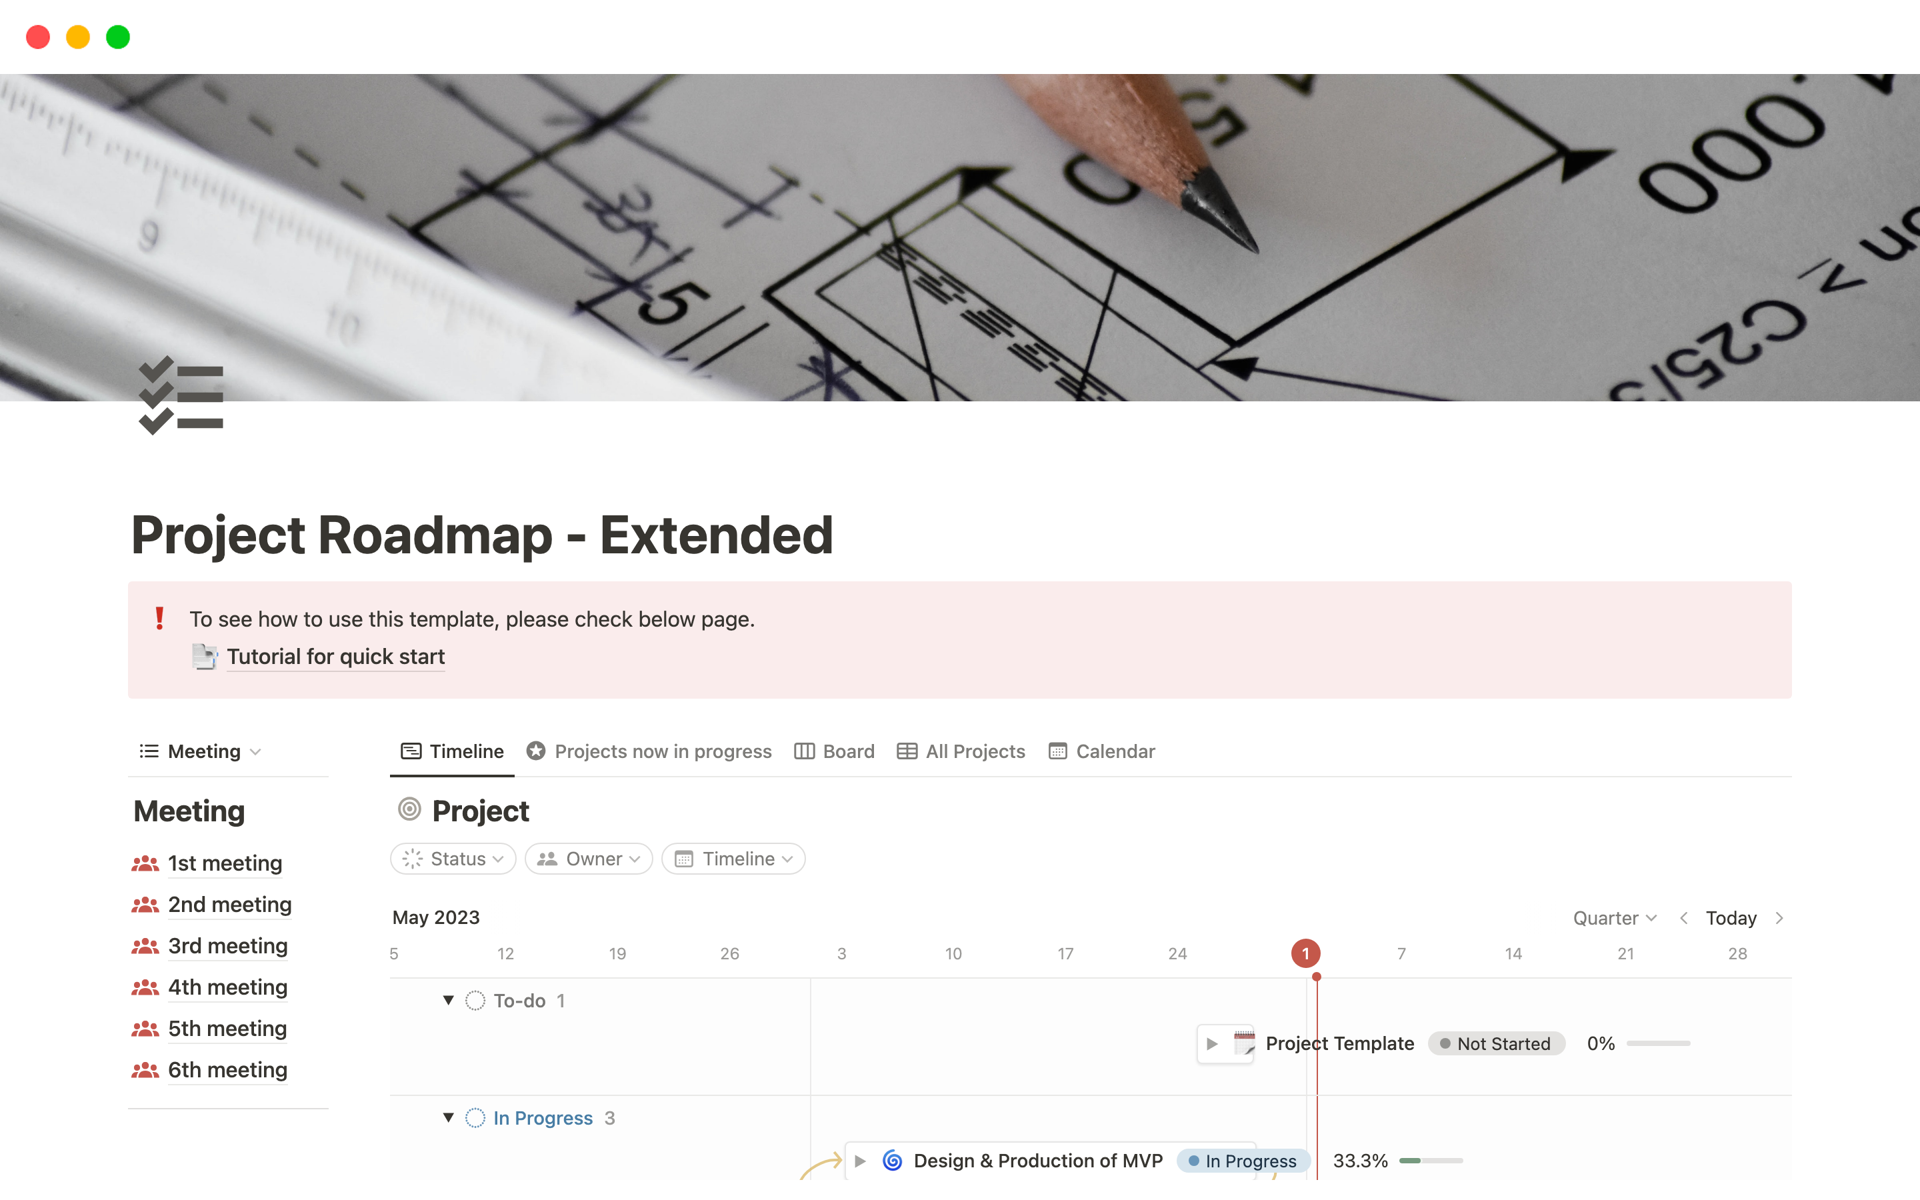 This template is designed for anyone who wants to manage projects intuitively and efficiently through timelines and databases!